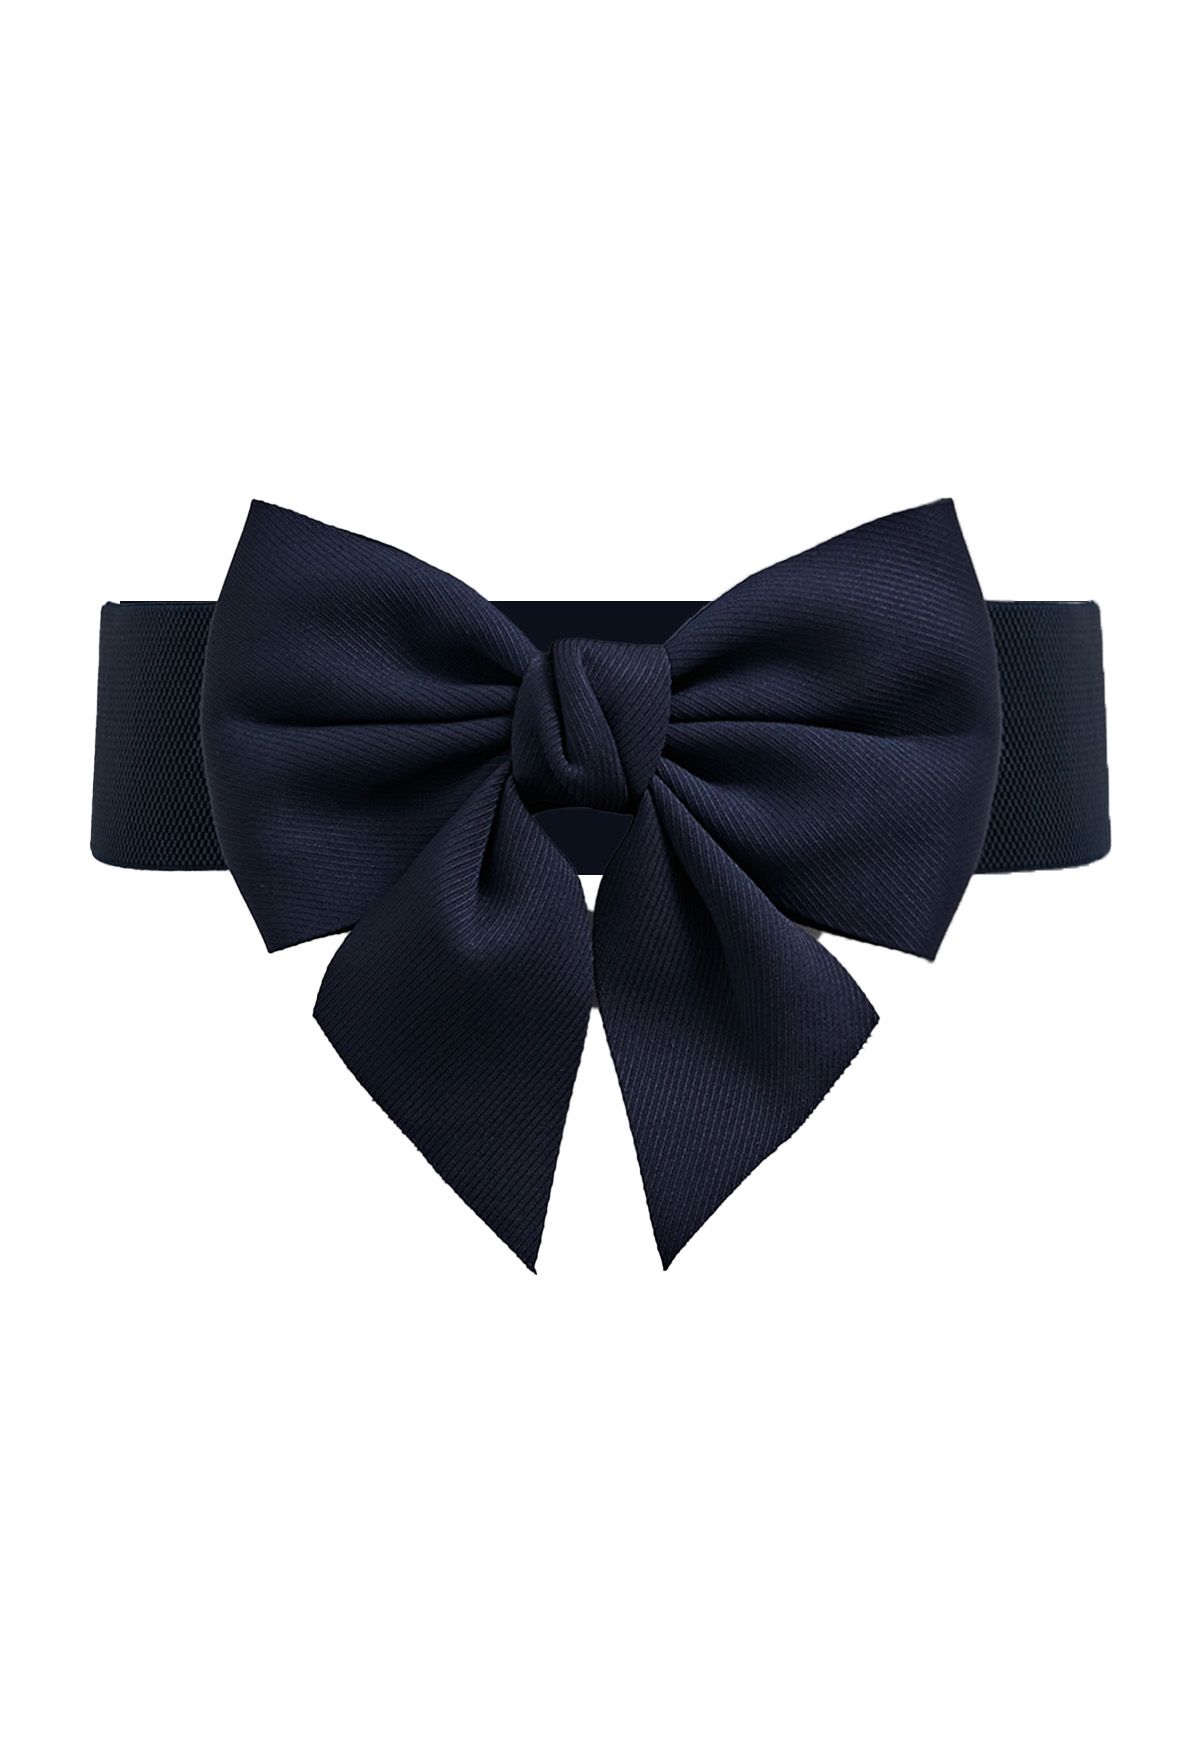 Stretchy Solid Color Bowknot Corset Belt in Navy